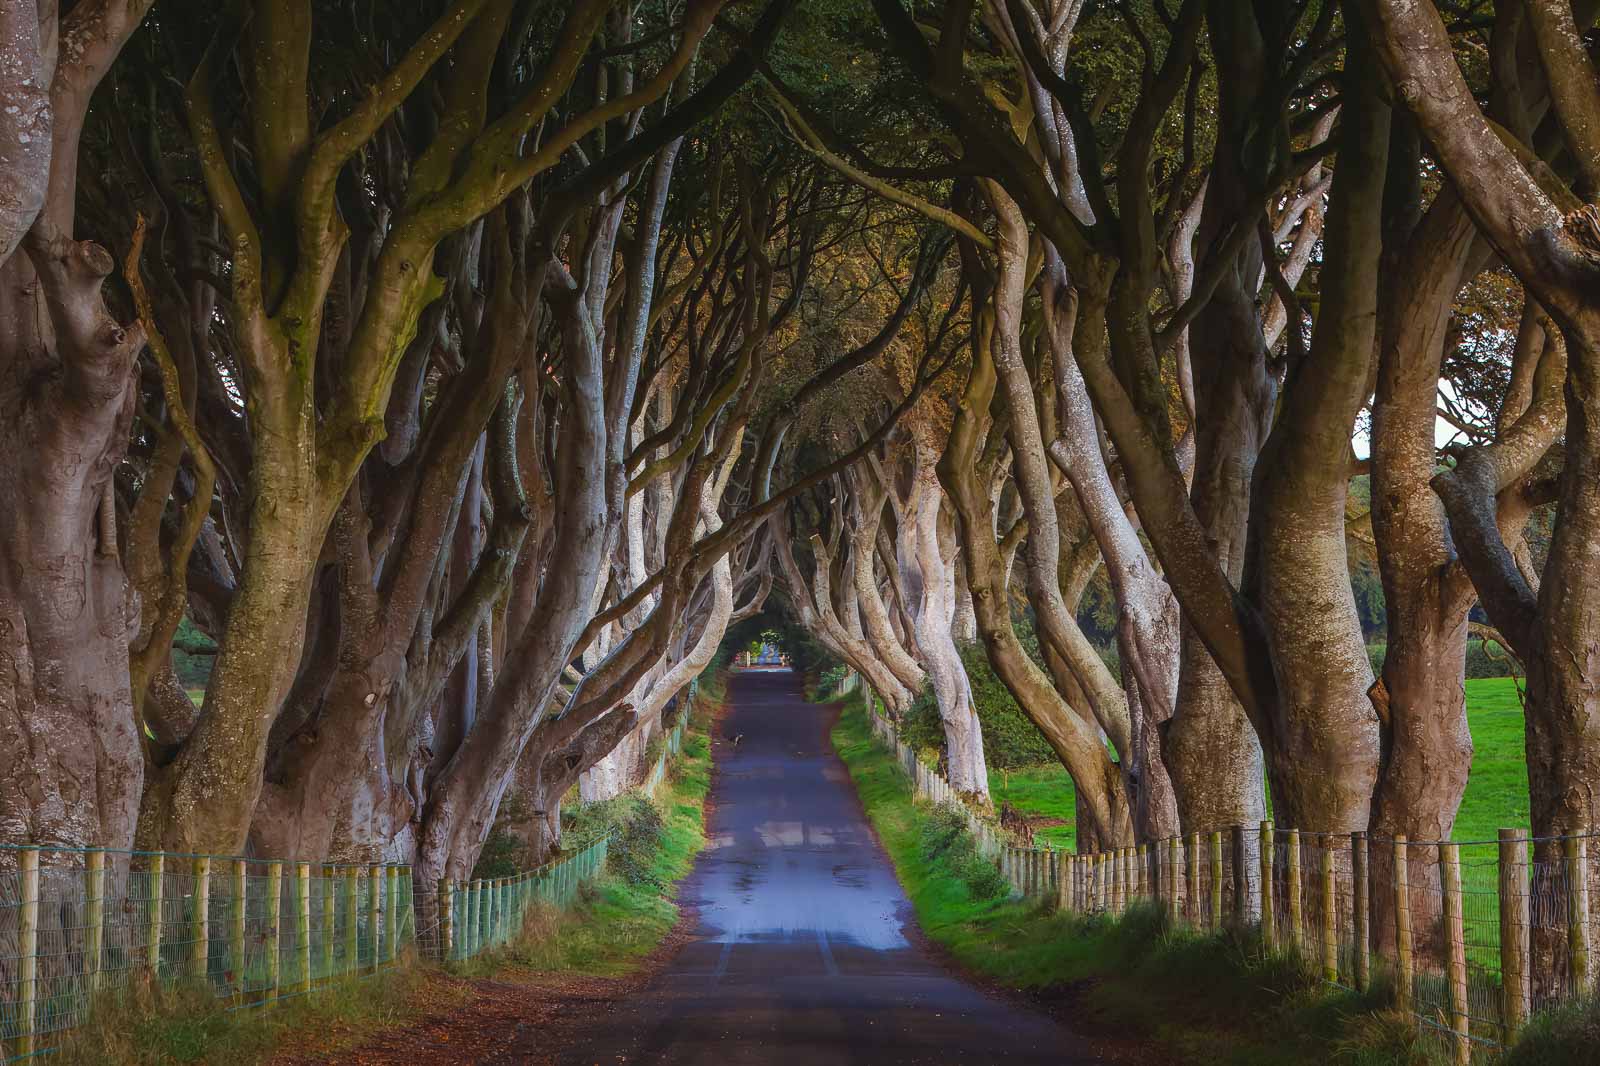 How to visit the Giants Causeway Dark Hedges